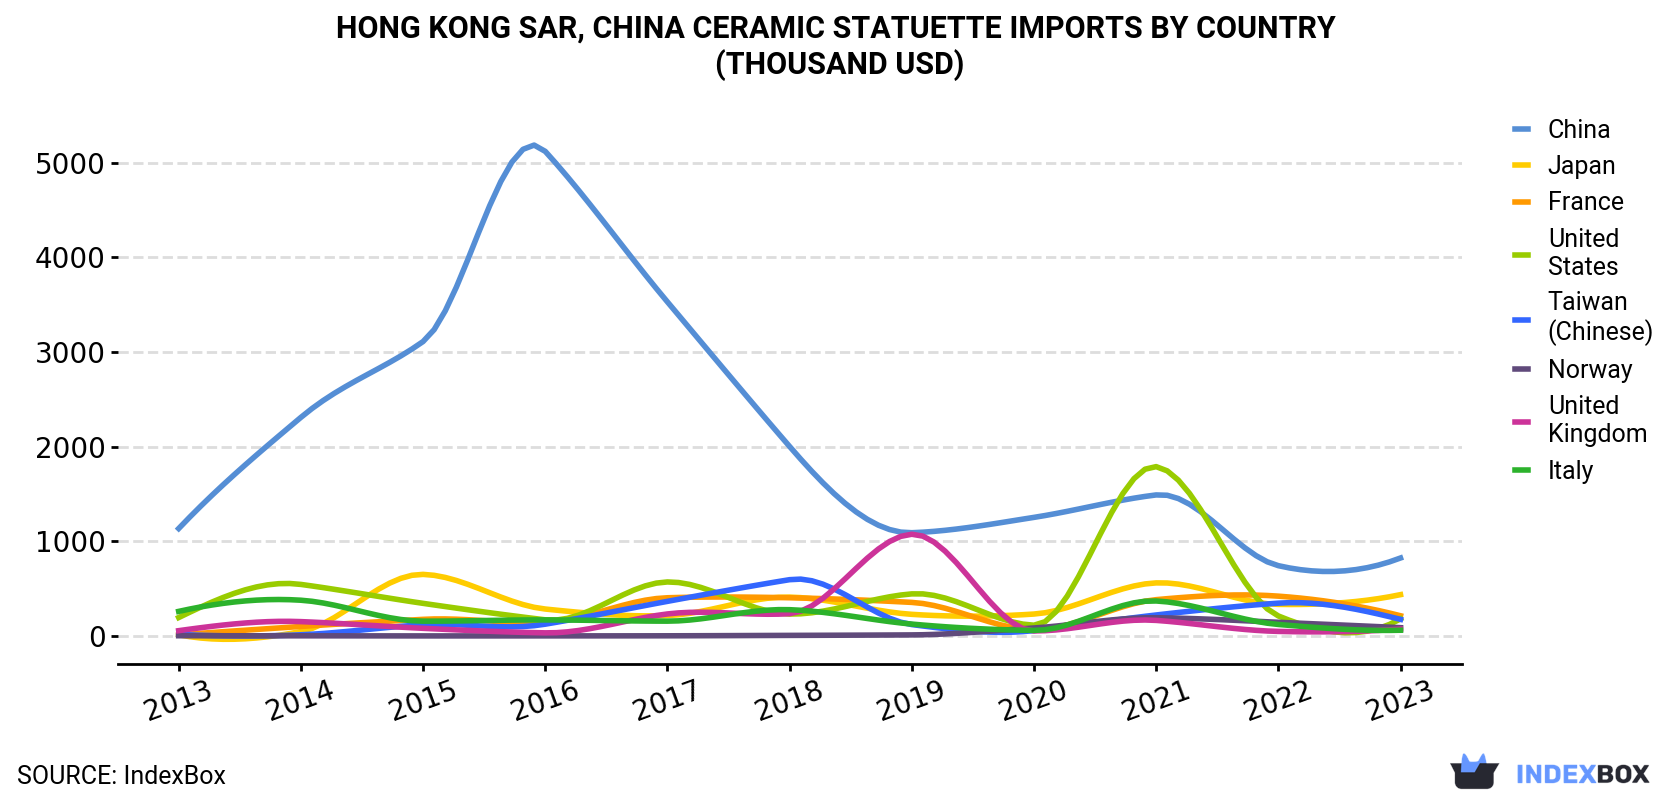 Hong Kong Ceramic Statuette Imports By Country (Thousand USD)